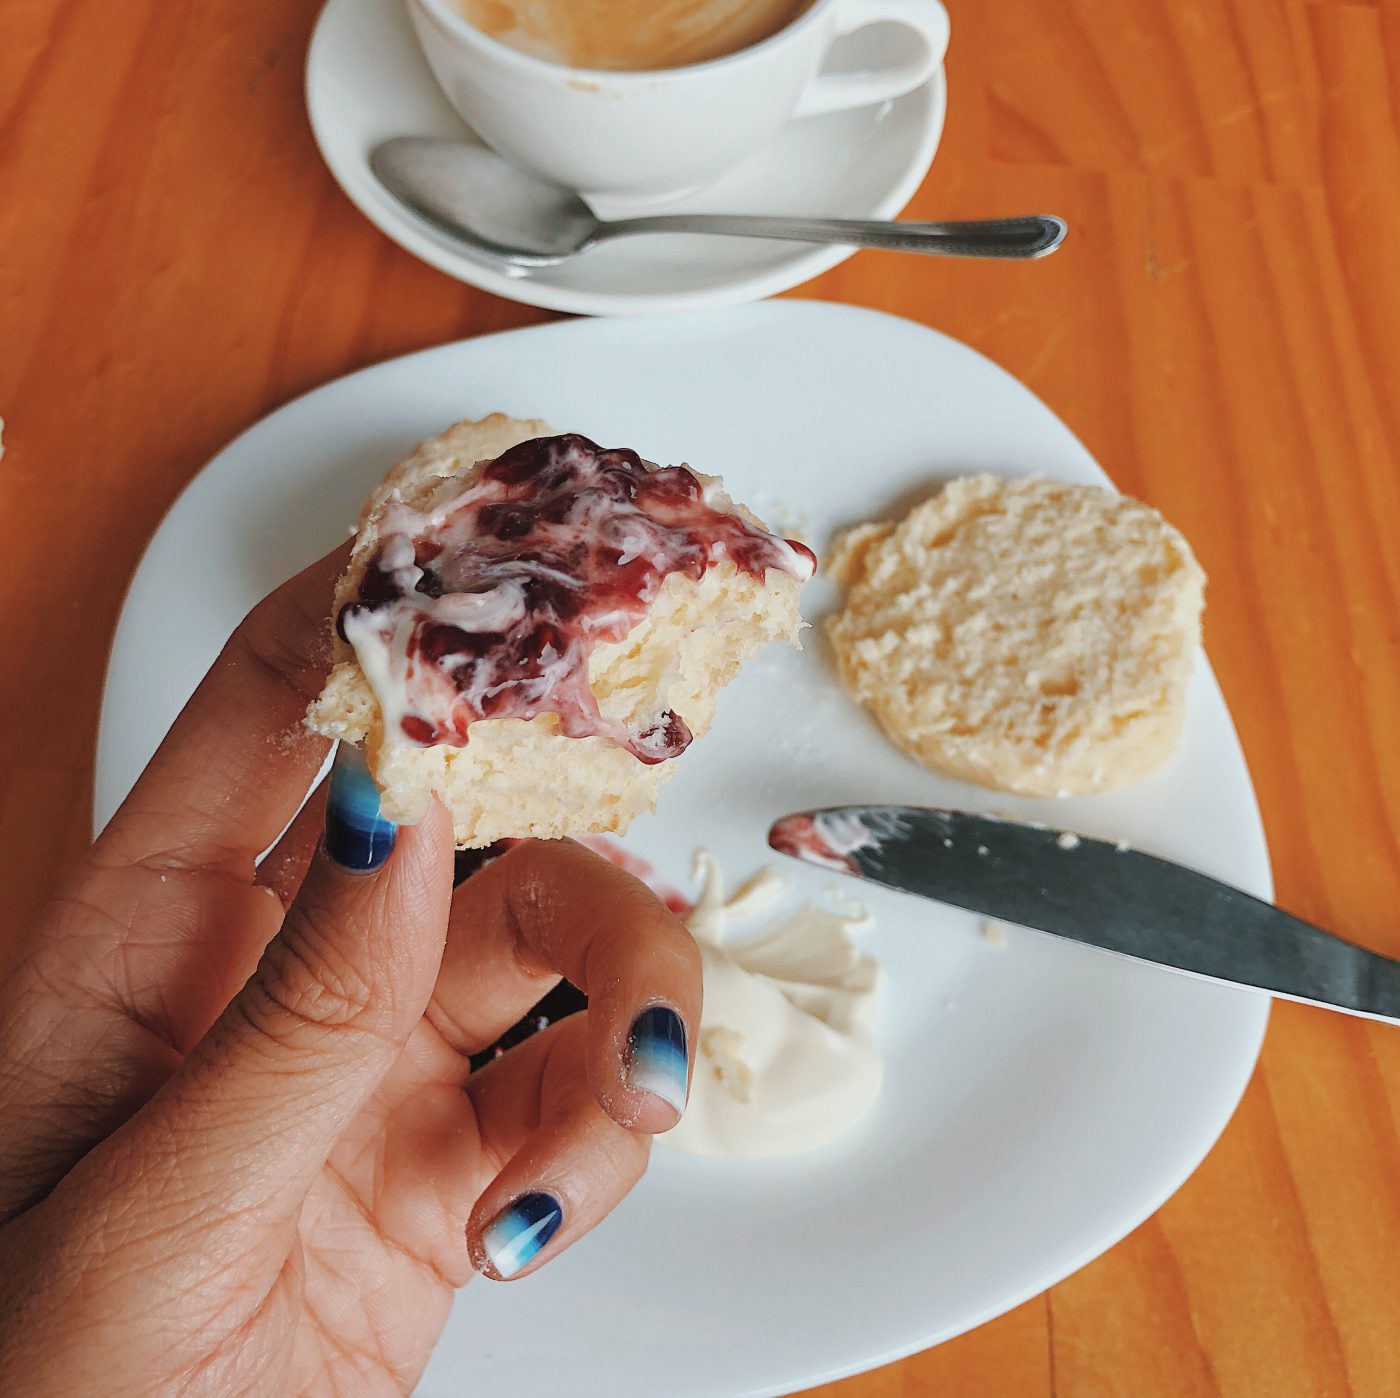 My scones with jam and clotted cream!